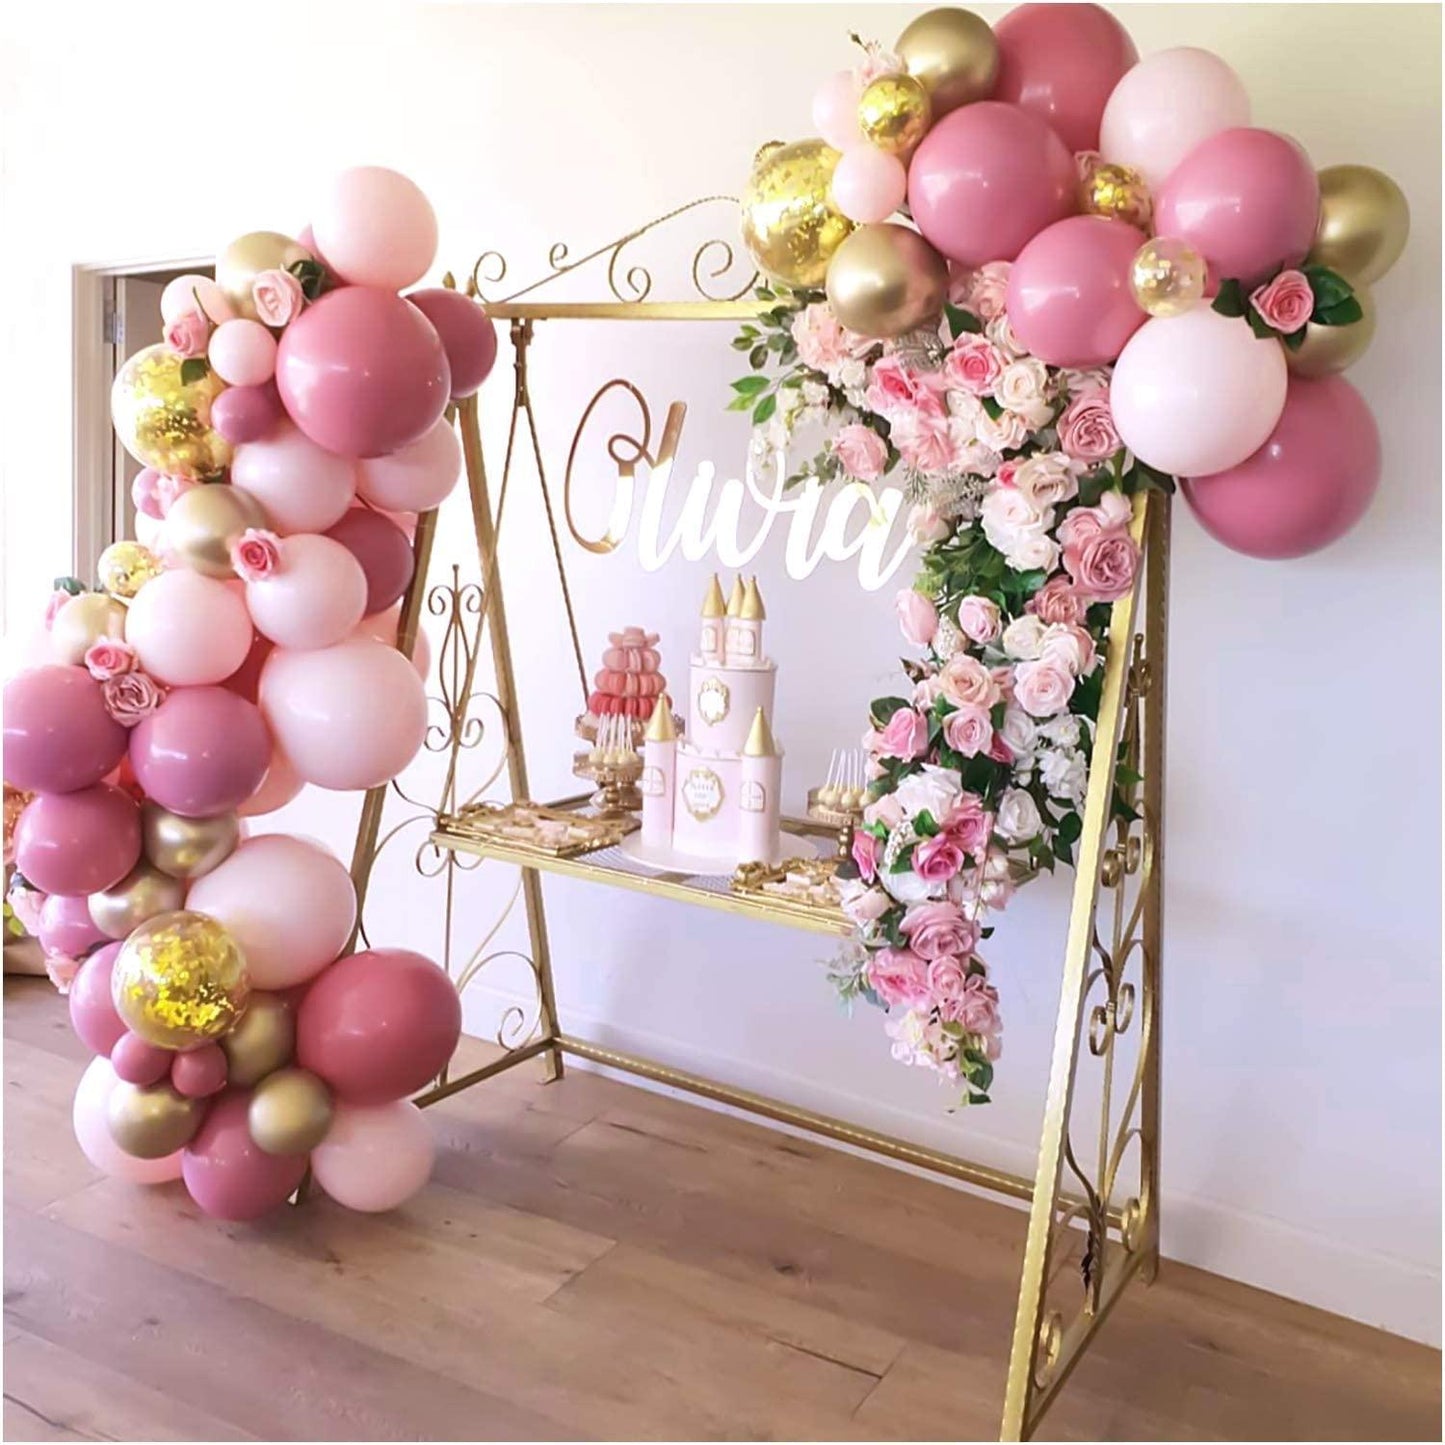 136Pcs Pink and Gold Baby Shower Balloons, Dusty Rose Pink Ballon Garland Balloons Kit - If you say i do